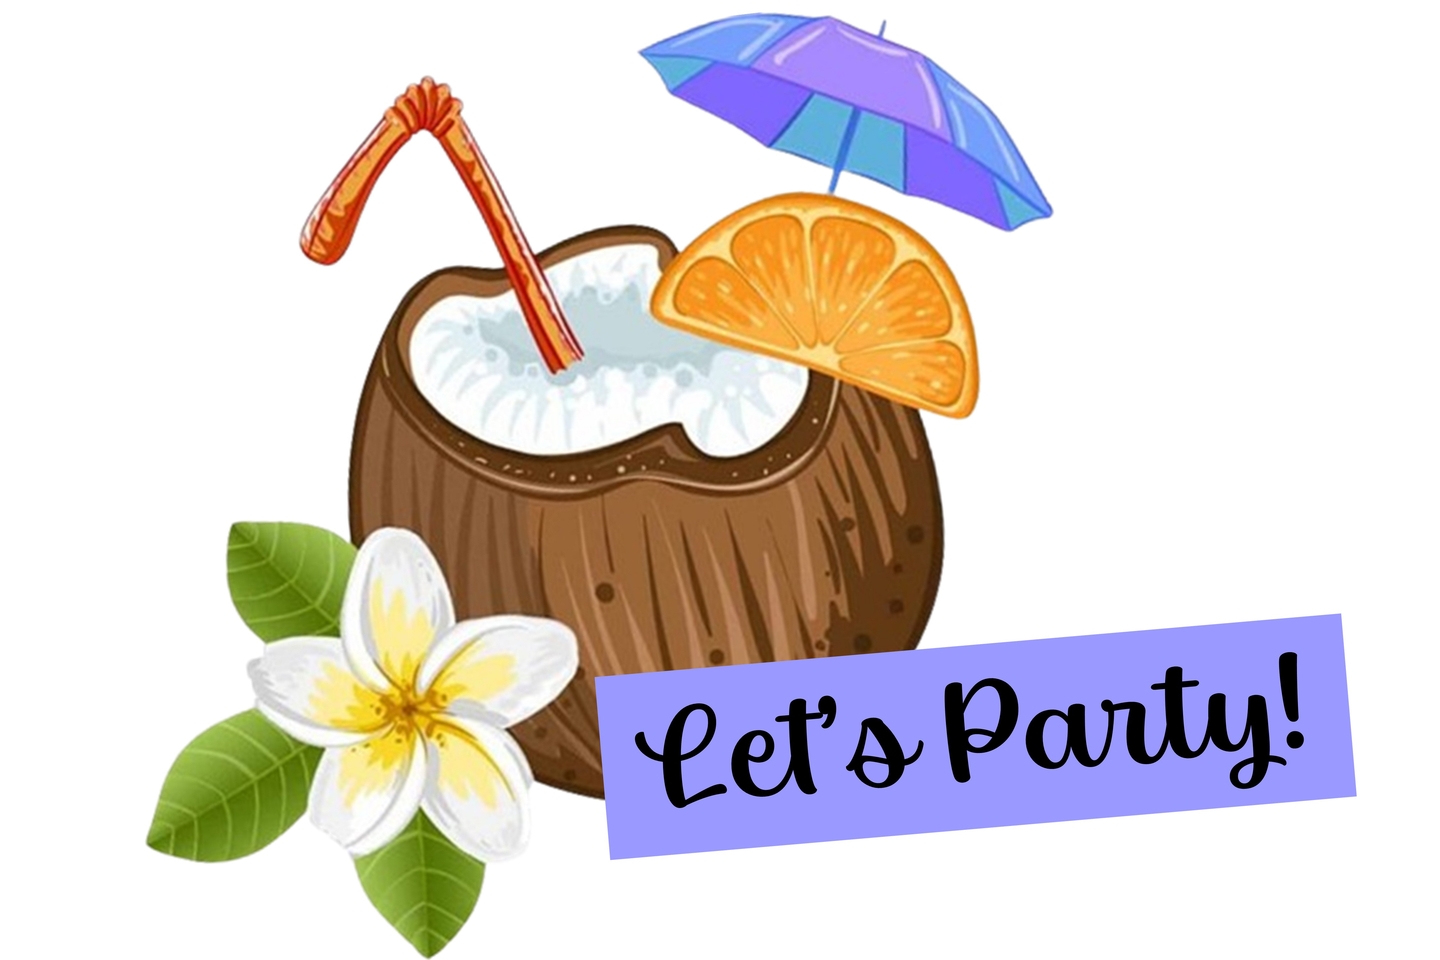 "Let's Party!" written across a coconut shell party cup.